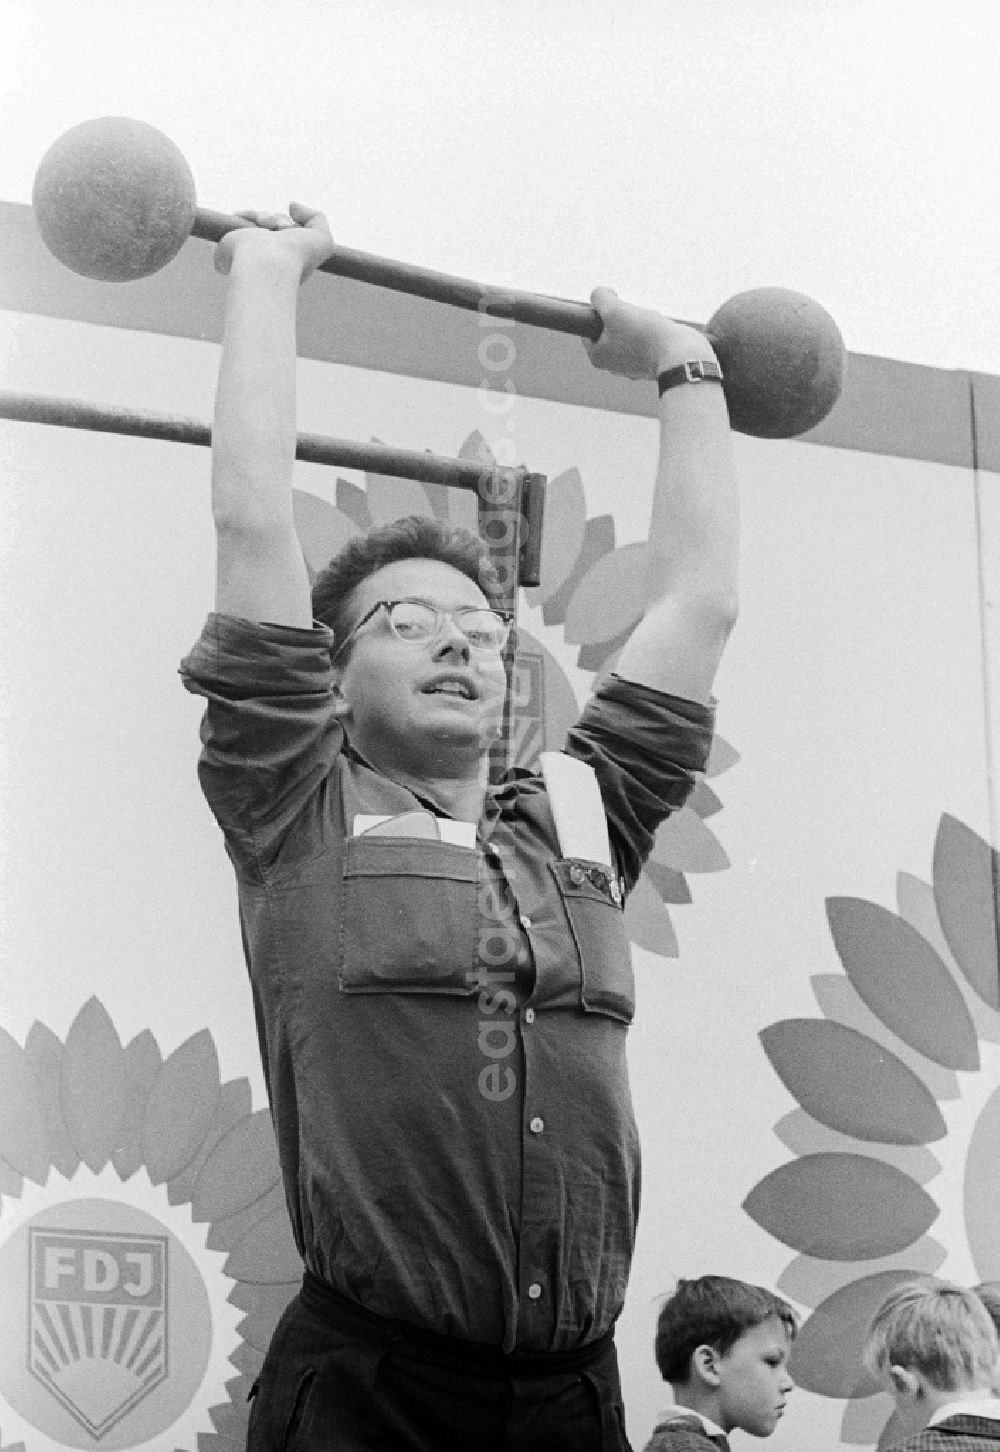 GDR photo archive: Chemnitz - Young person lifting weights at the Pentecost meeting of the FDJ in Karl-Marx-Stadt, today Chemnitz in the federal state Saxony on the territory of the former GDR, German Democratic Republic